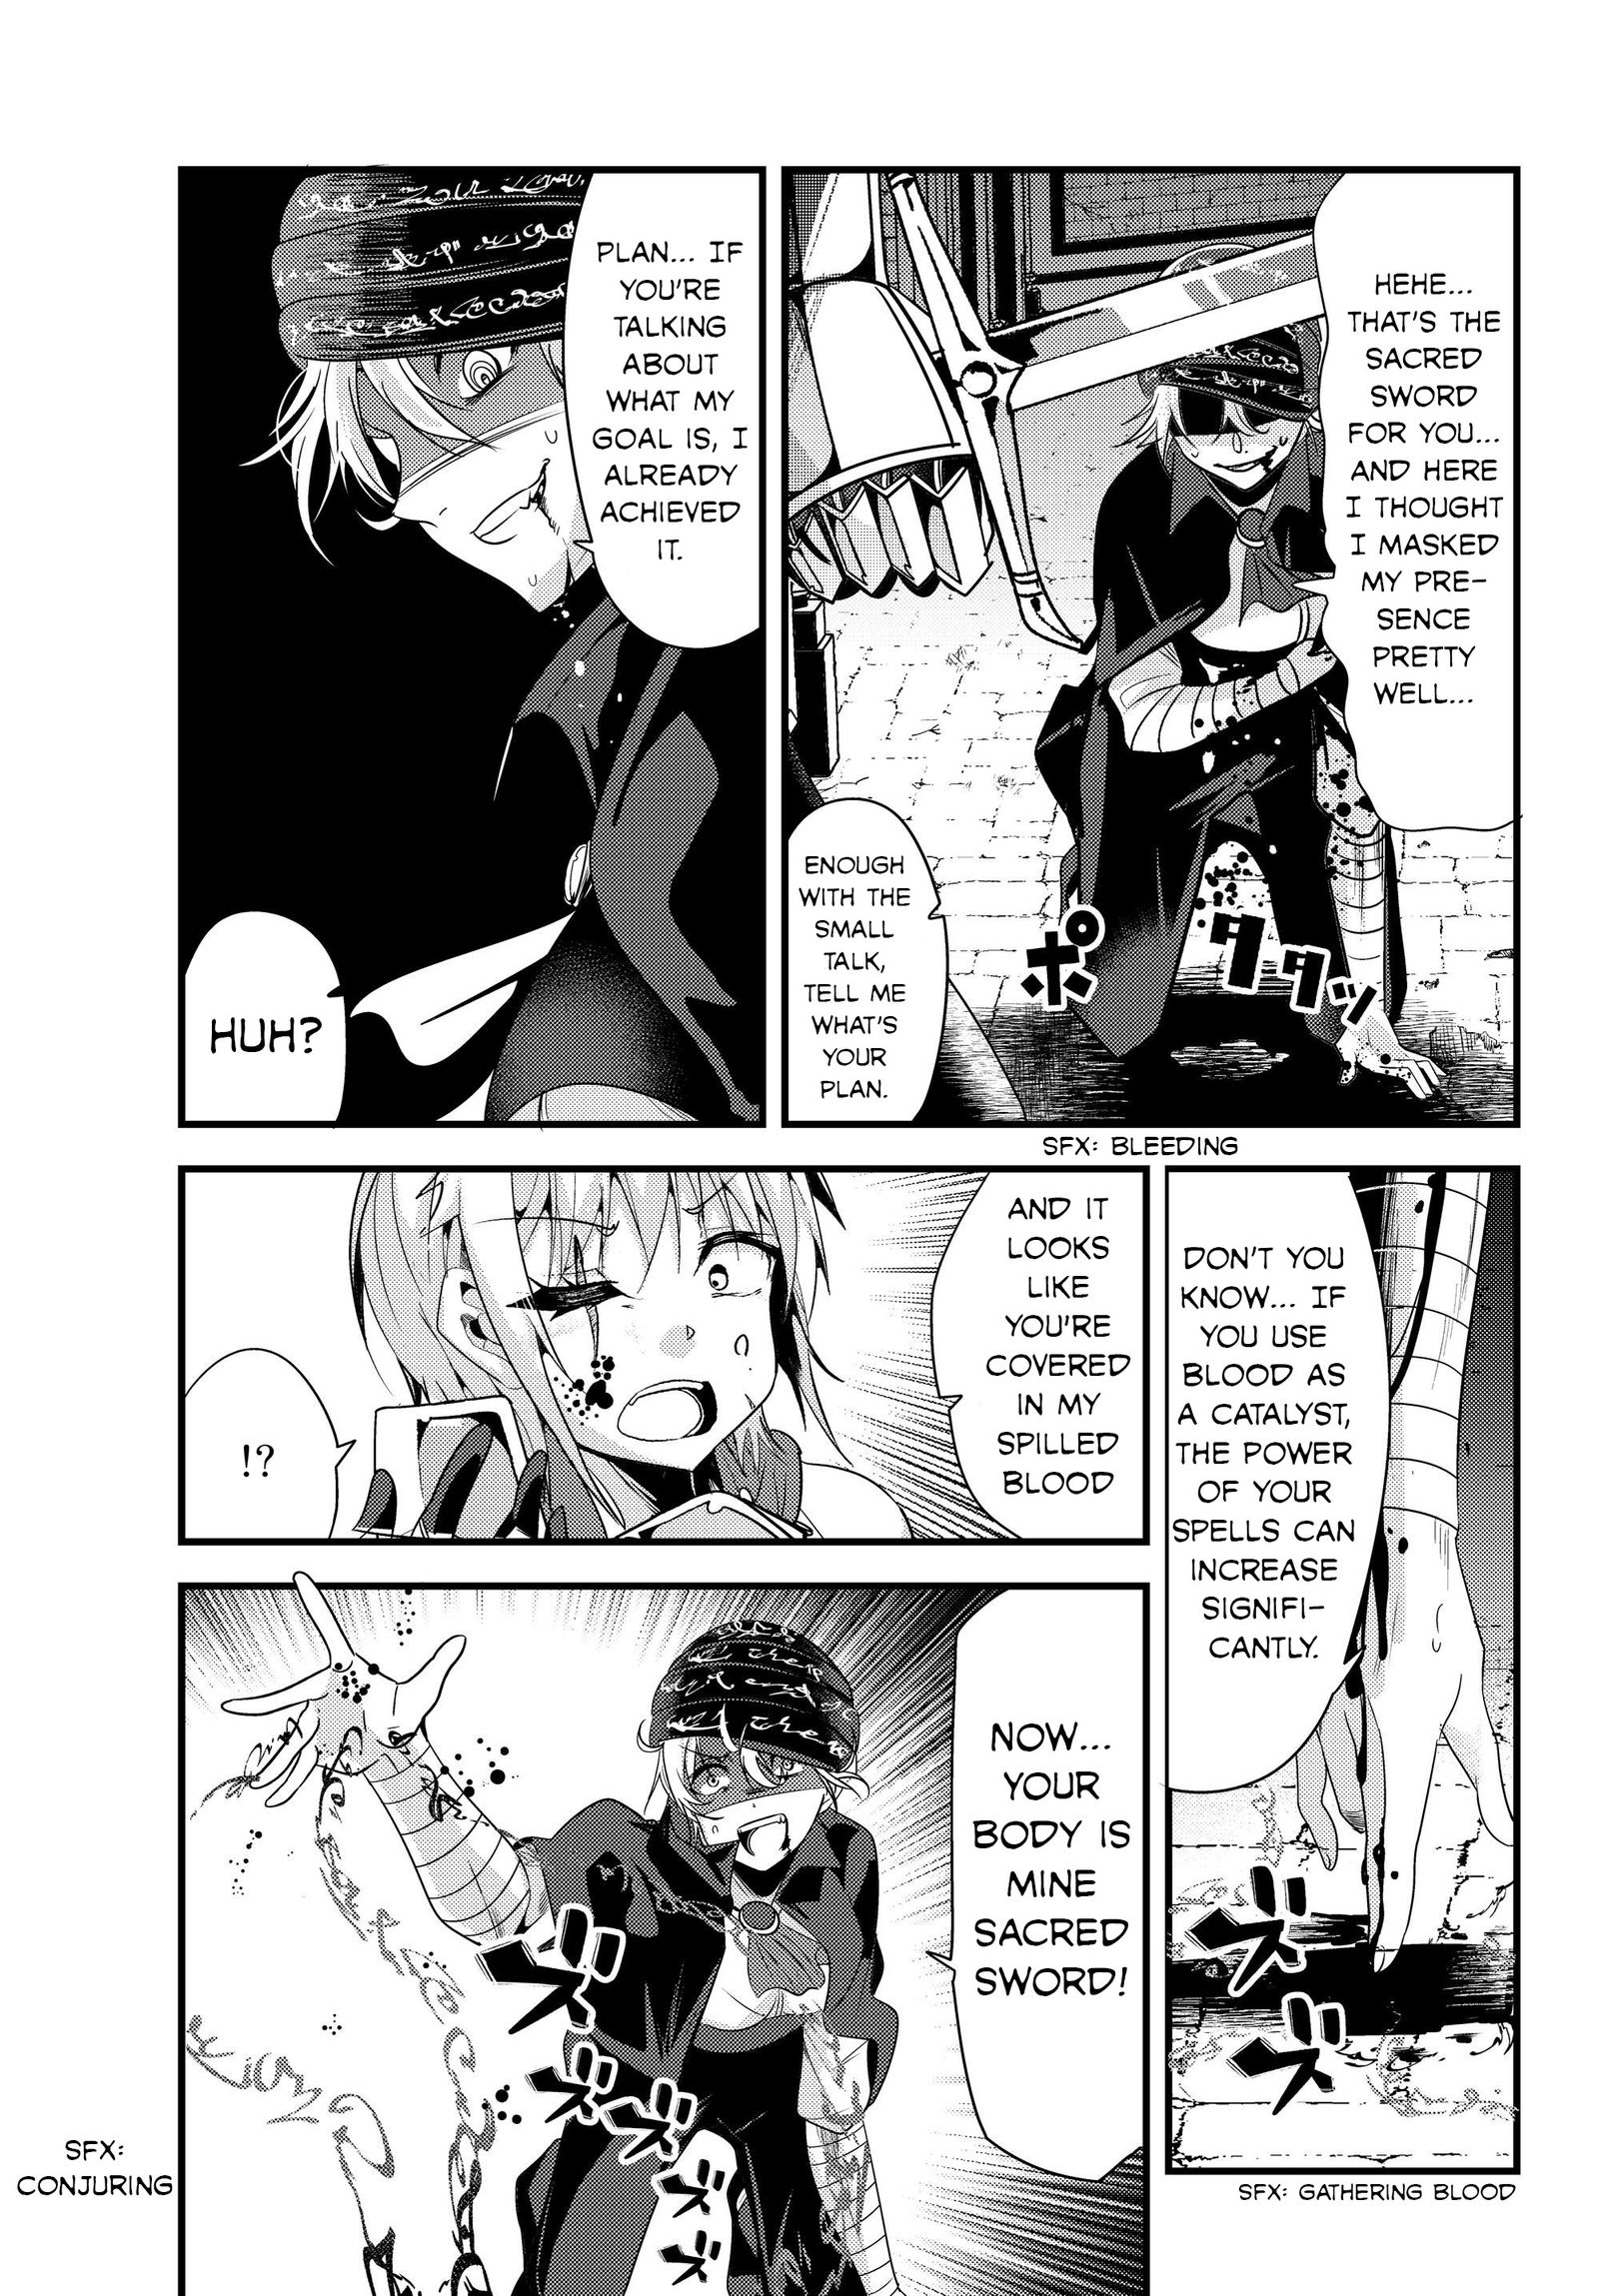 A Story About Treating a Female Knight Who Has Never Been Treated as a Woman as a Woman ch.89